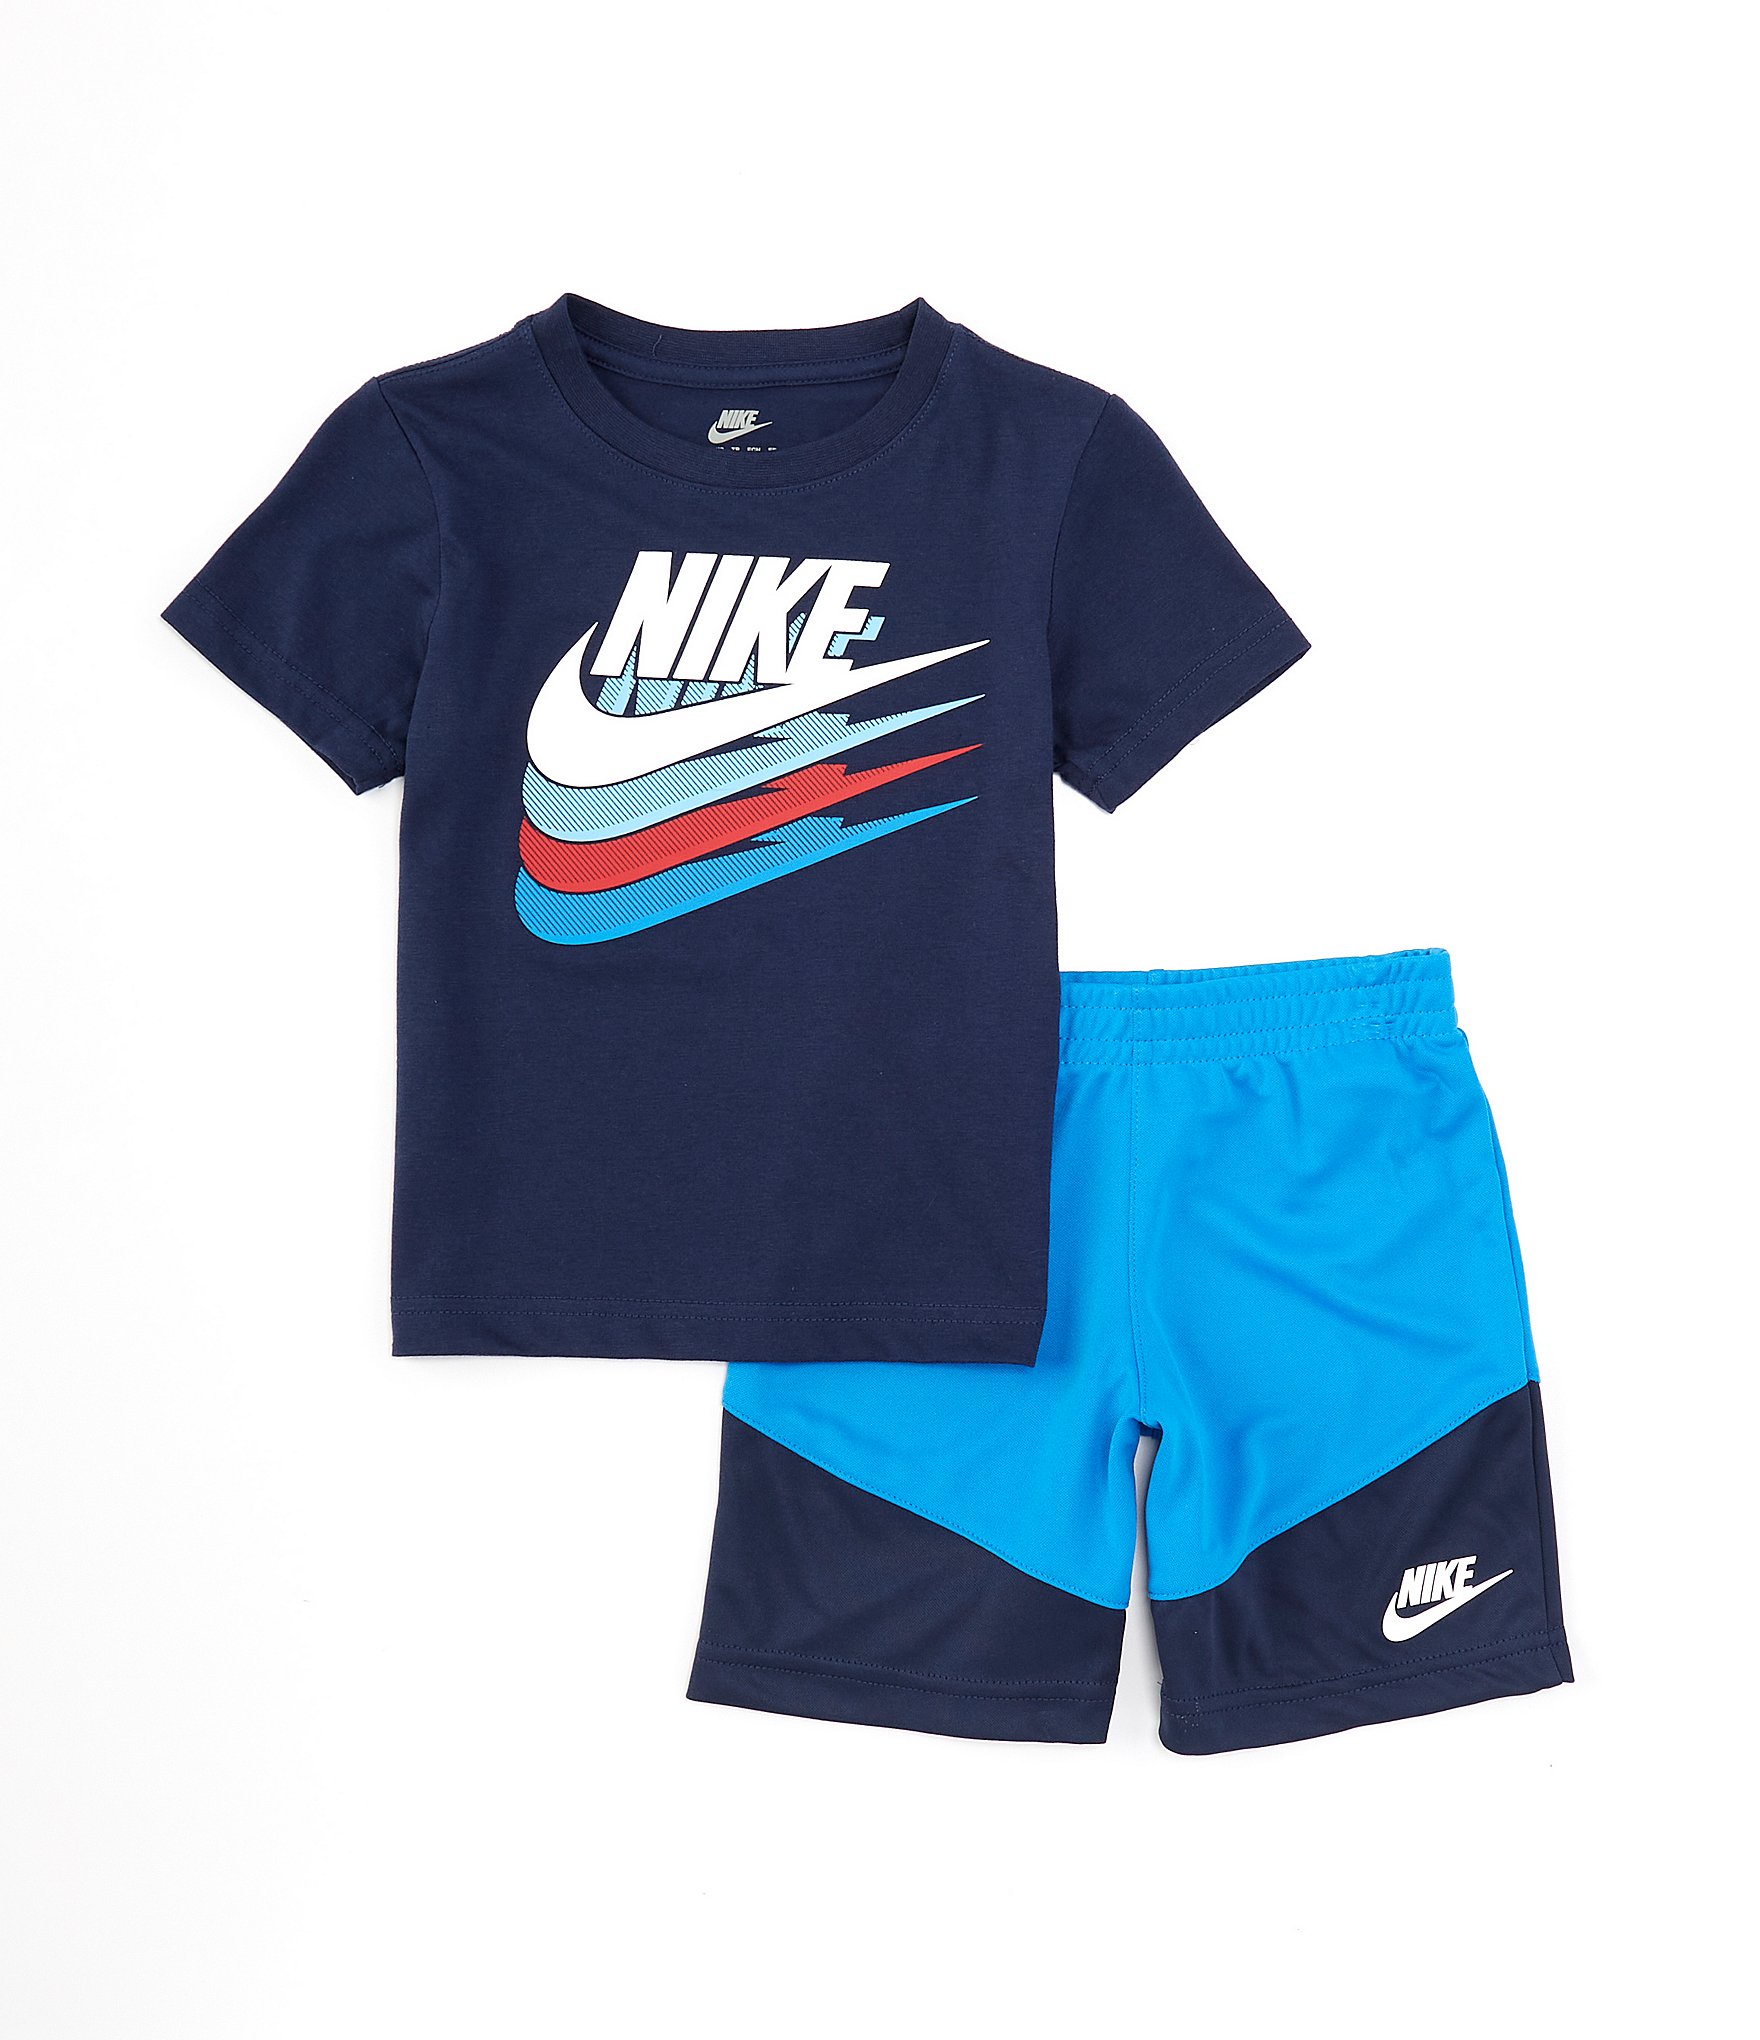 Boys' Outfits & Clothing Sets 2T-7